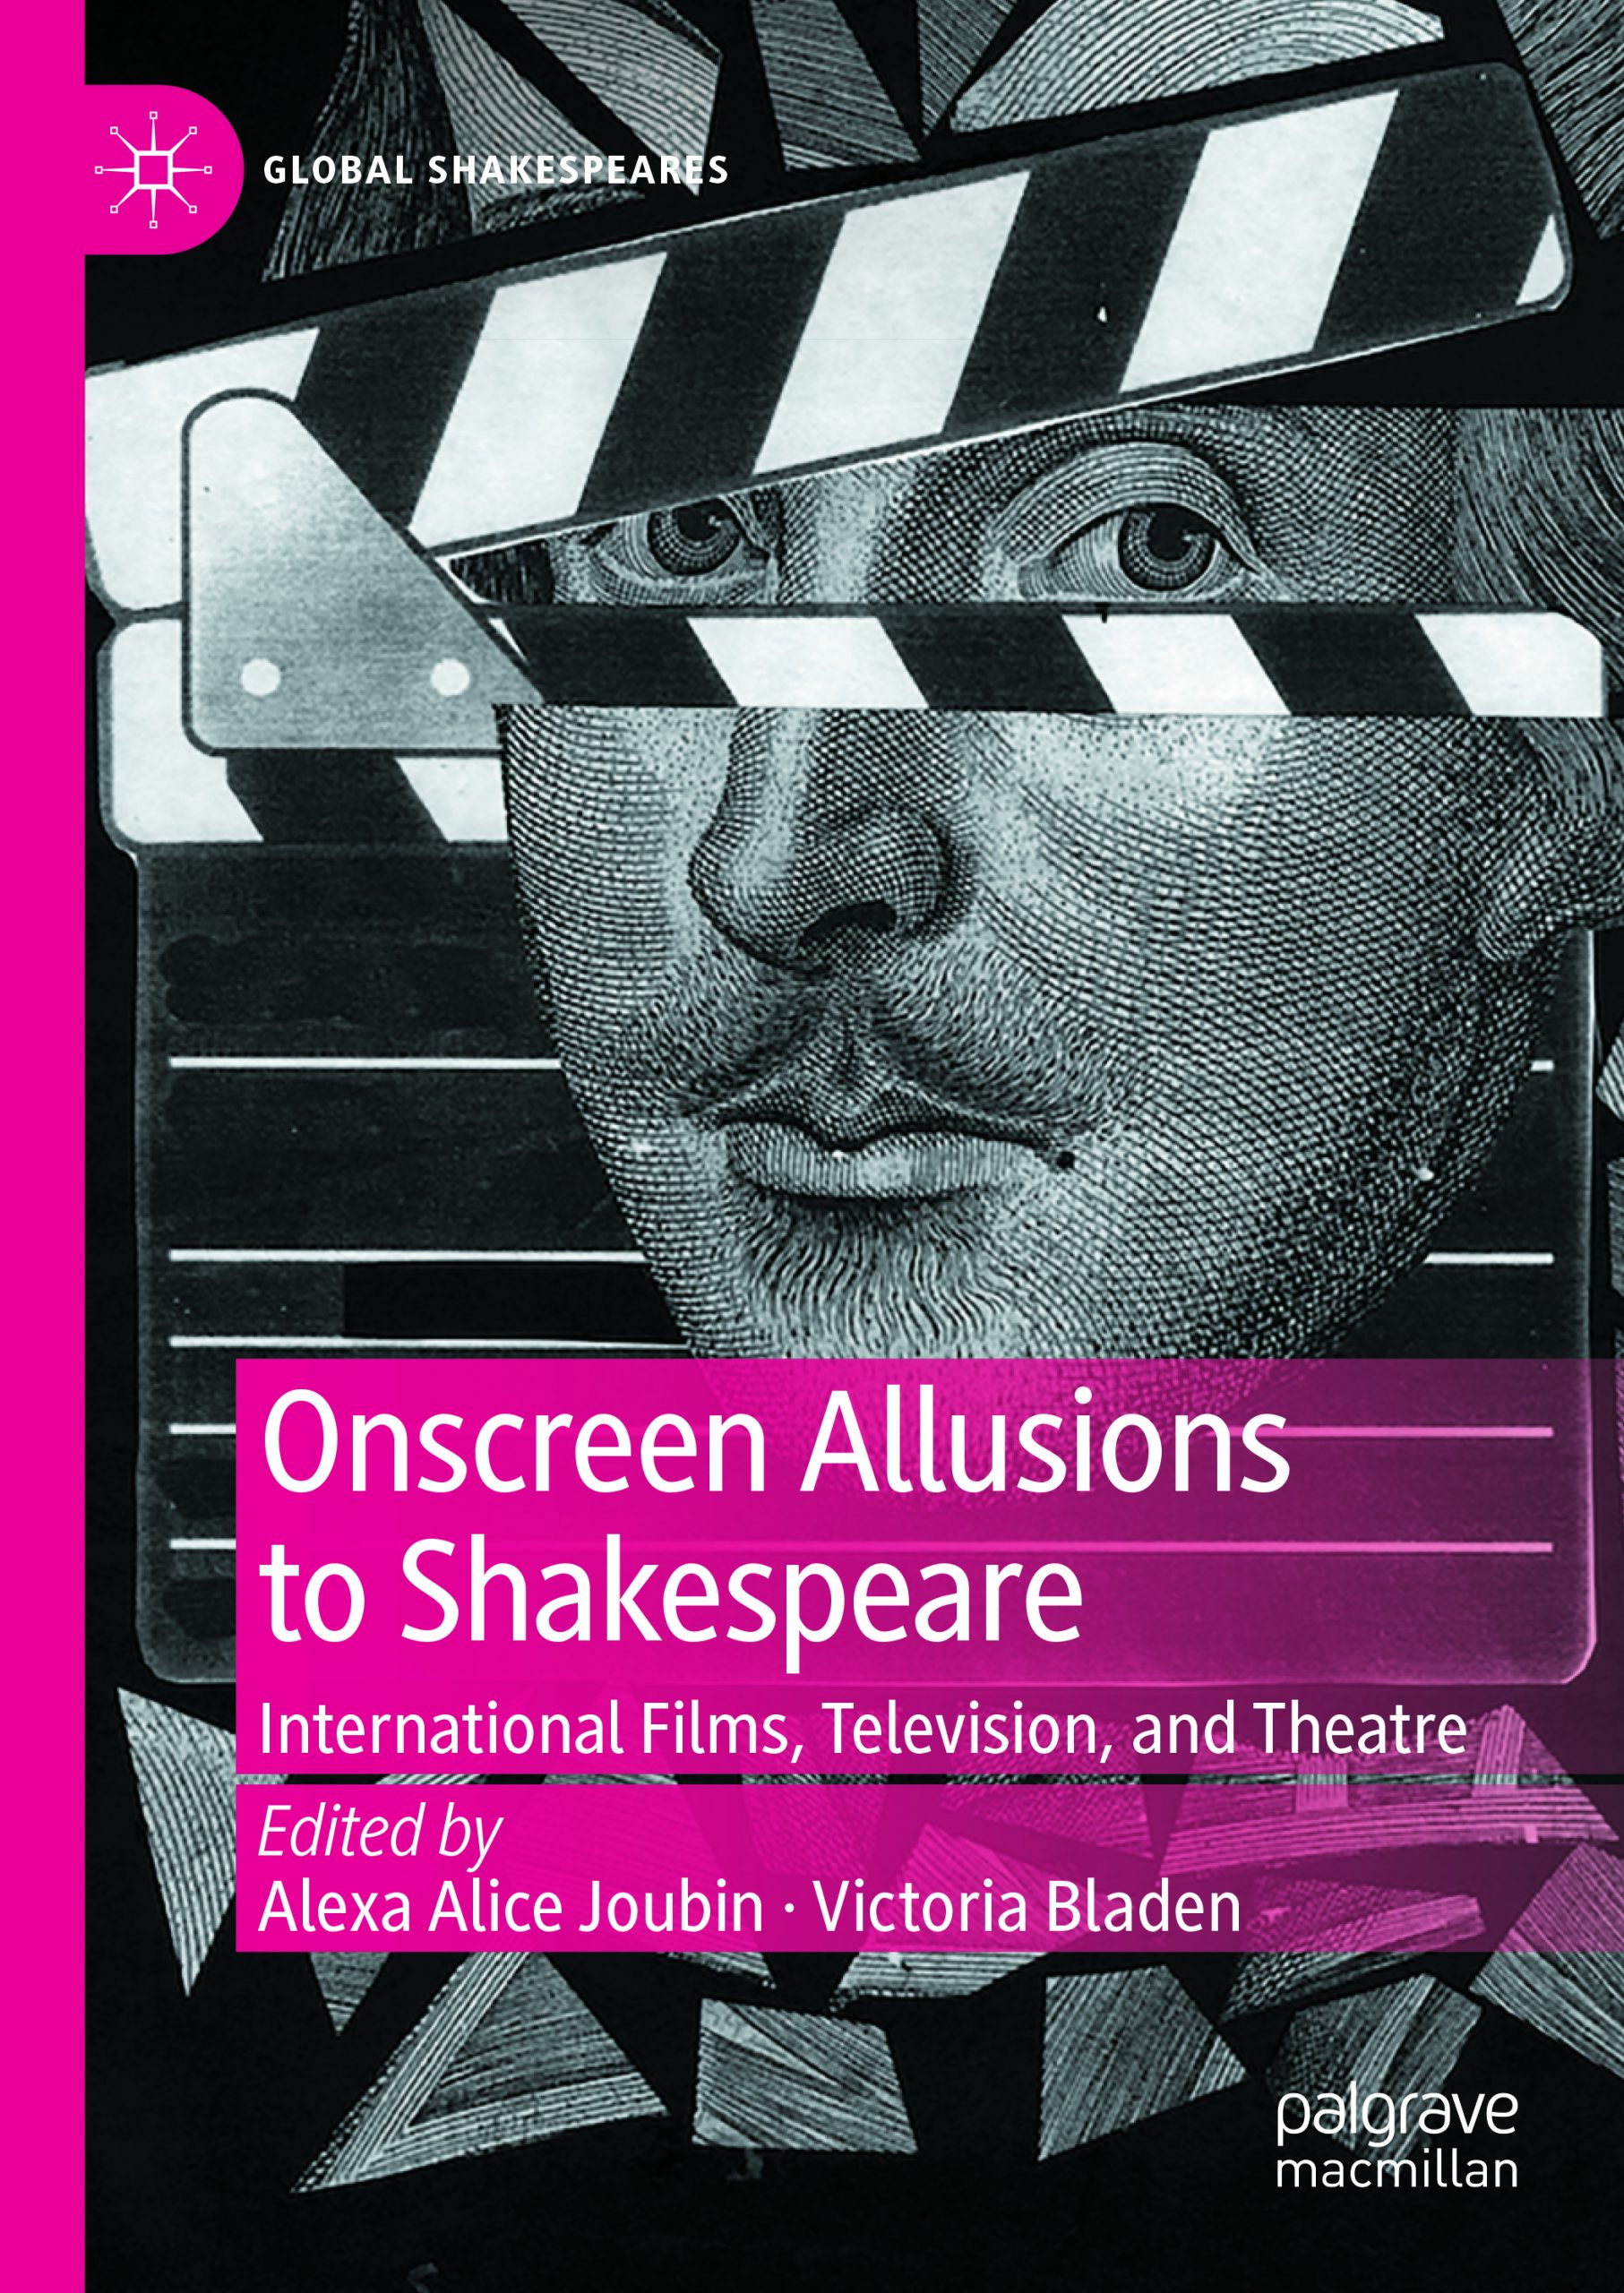 When Films Allude to Shakespeare …